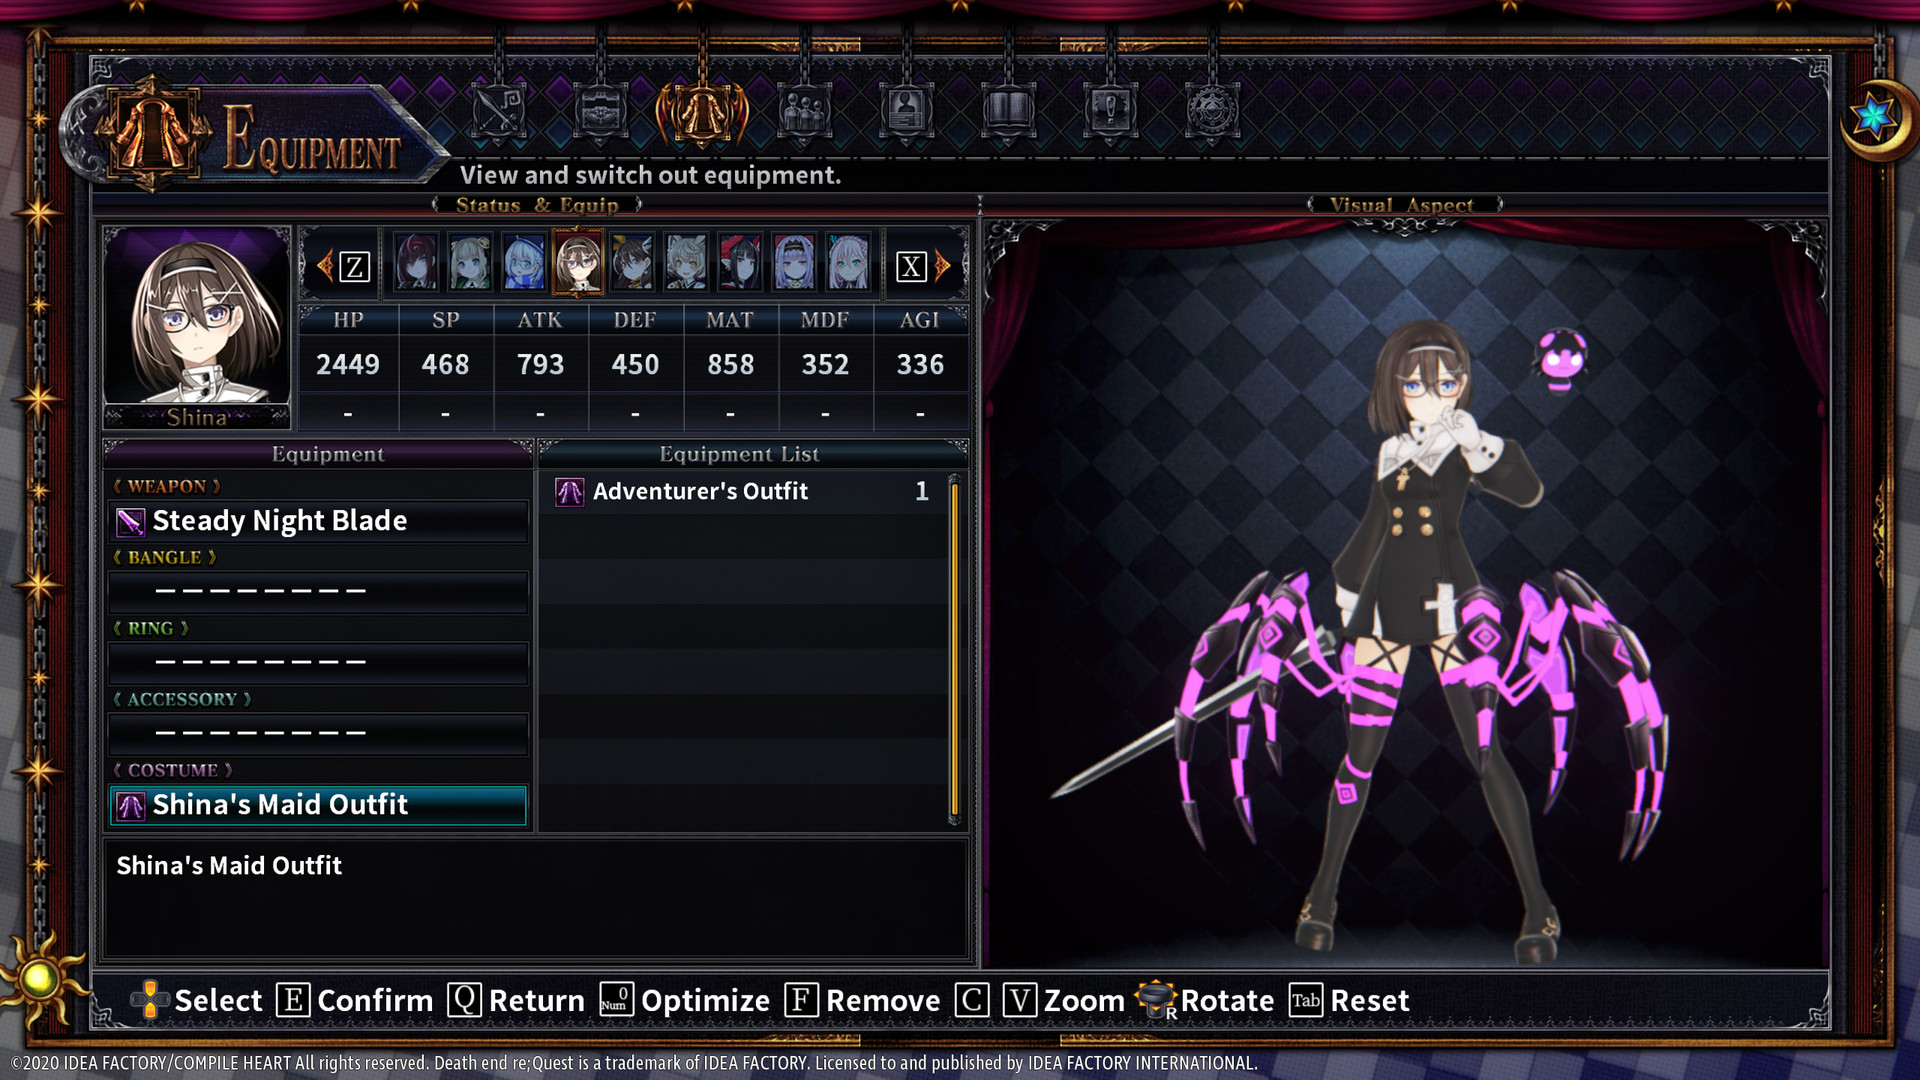 Death end re;Quest 2 - Shina's Maid Outfit Featured Screenshot #1